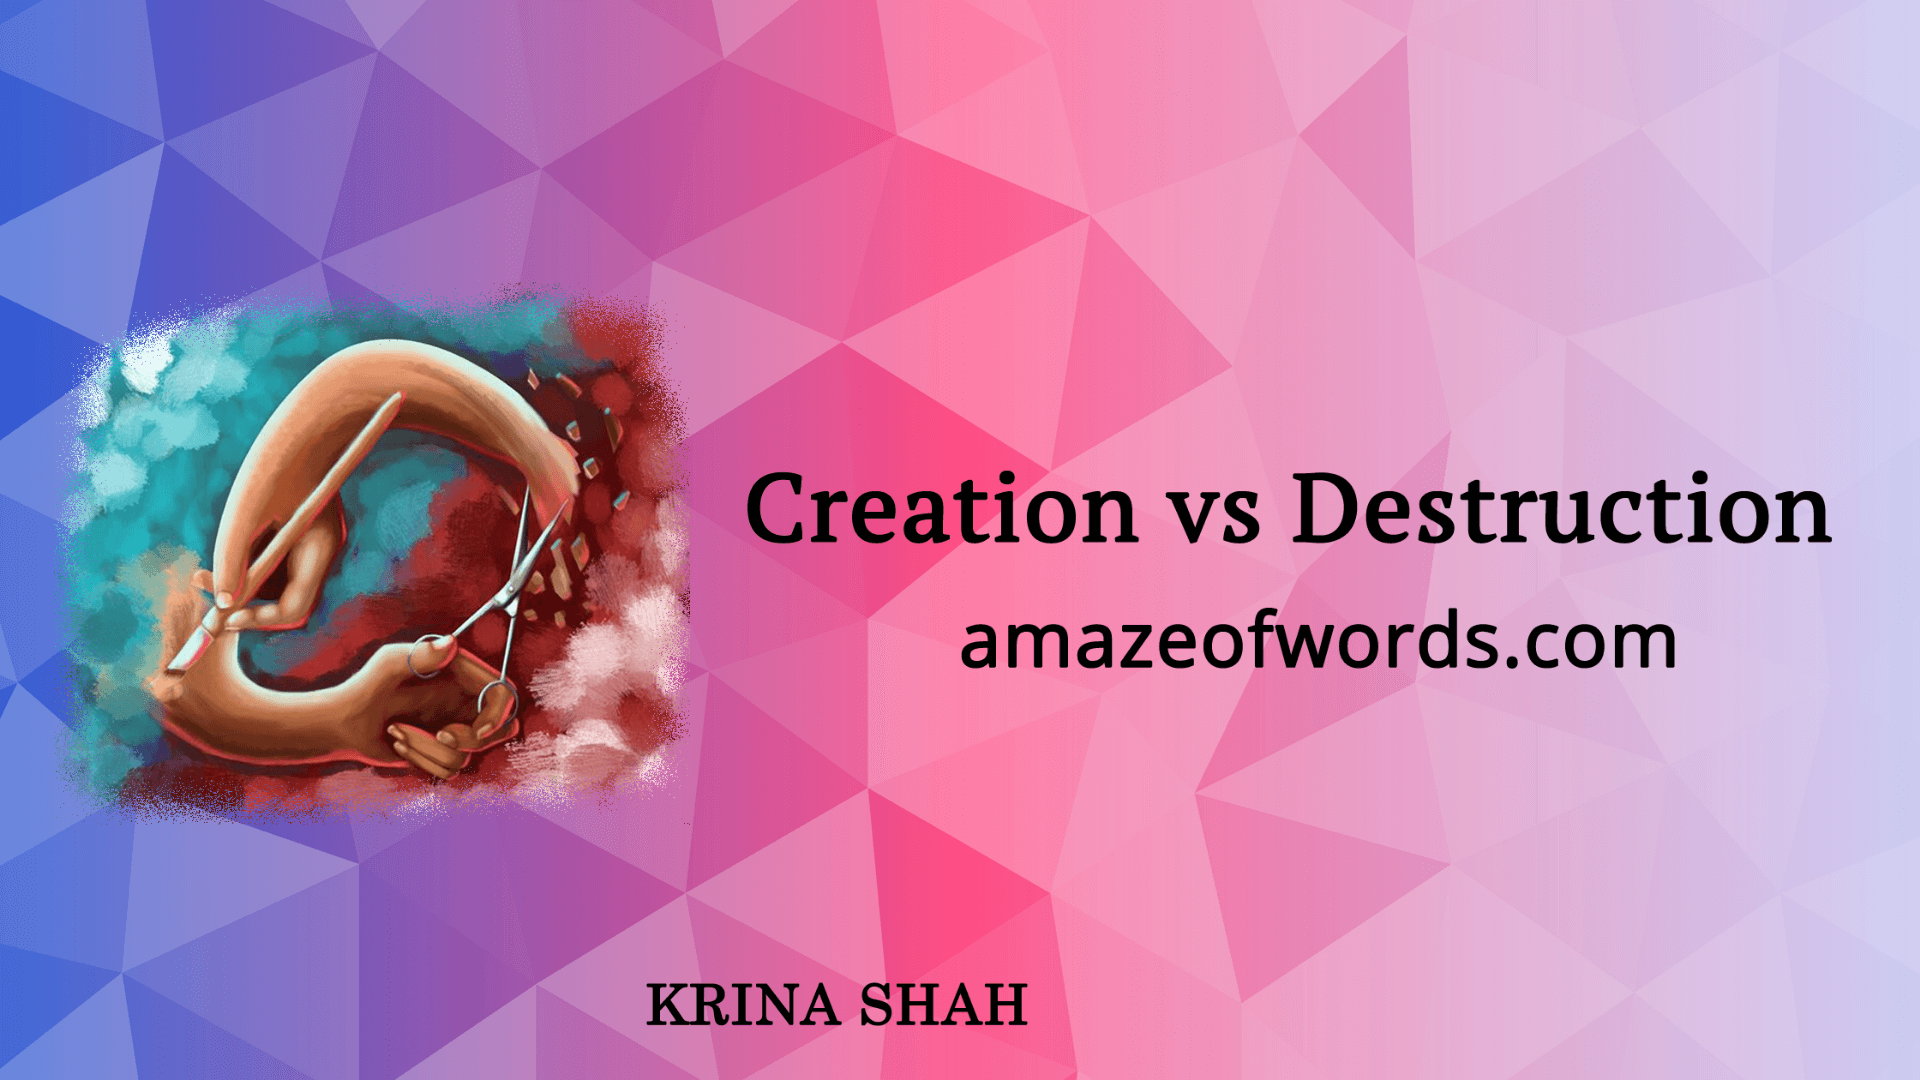 Creation & Destruction — Different sides of a same coin